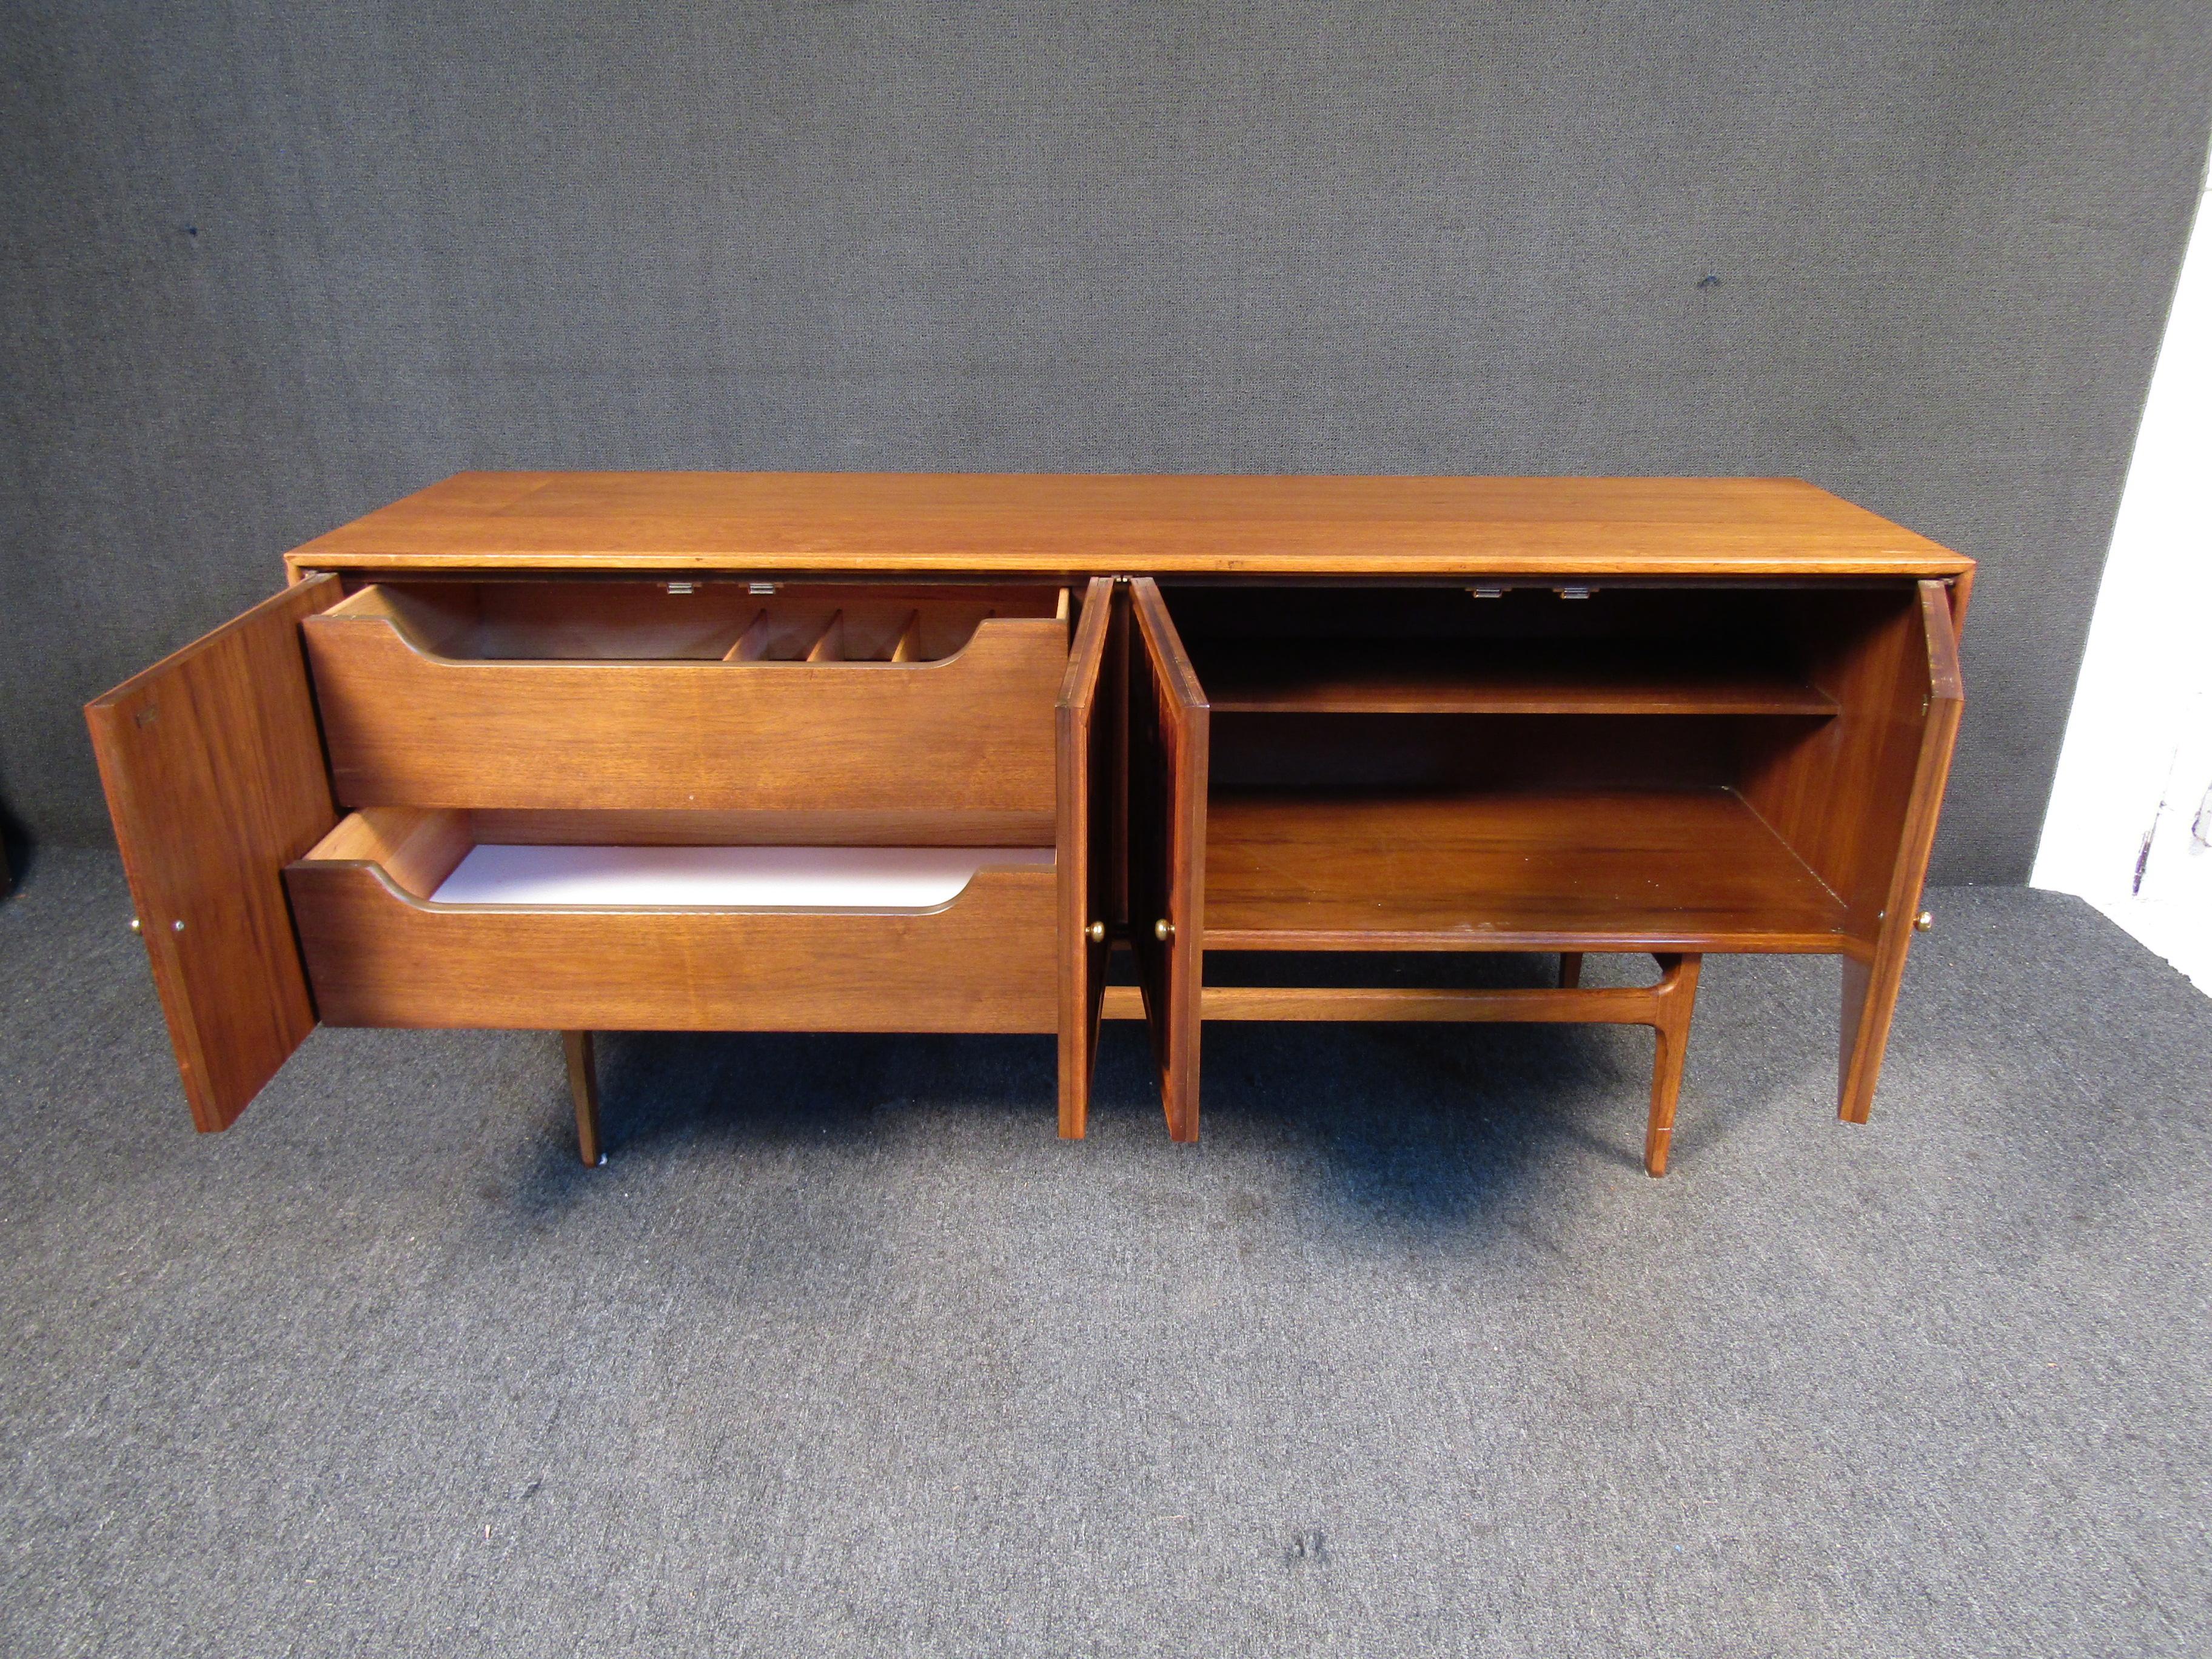 This Mid-Century Modern credenza features a unique front design, tapered legs and light walnut finish. The credenza also has two drawers and shelving offering adequate storage space. A beautiful addition to any home.


Please confirm item